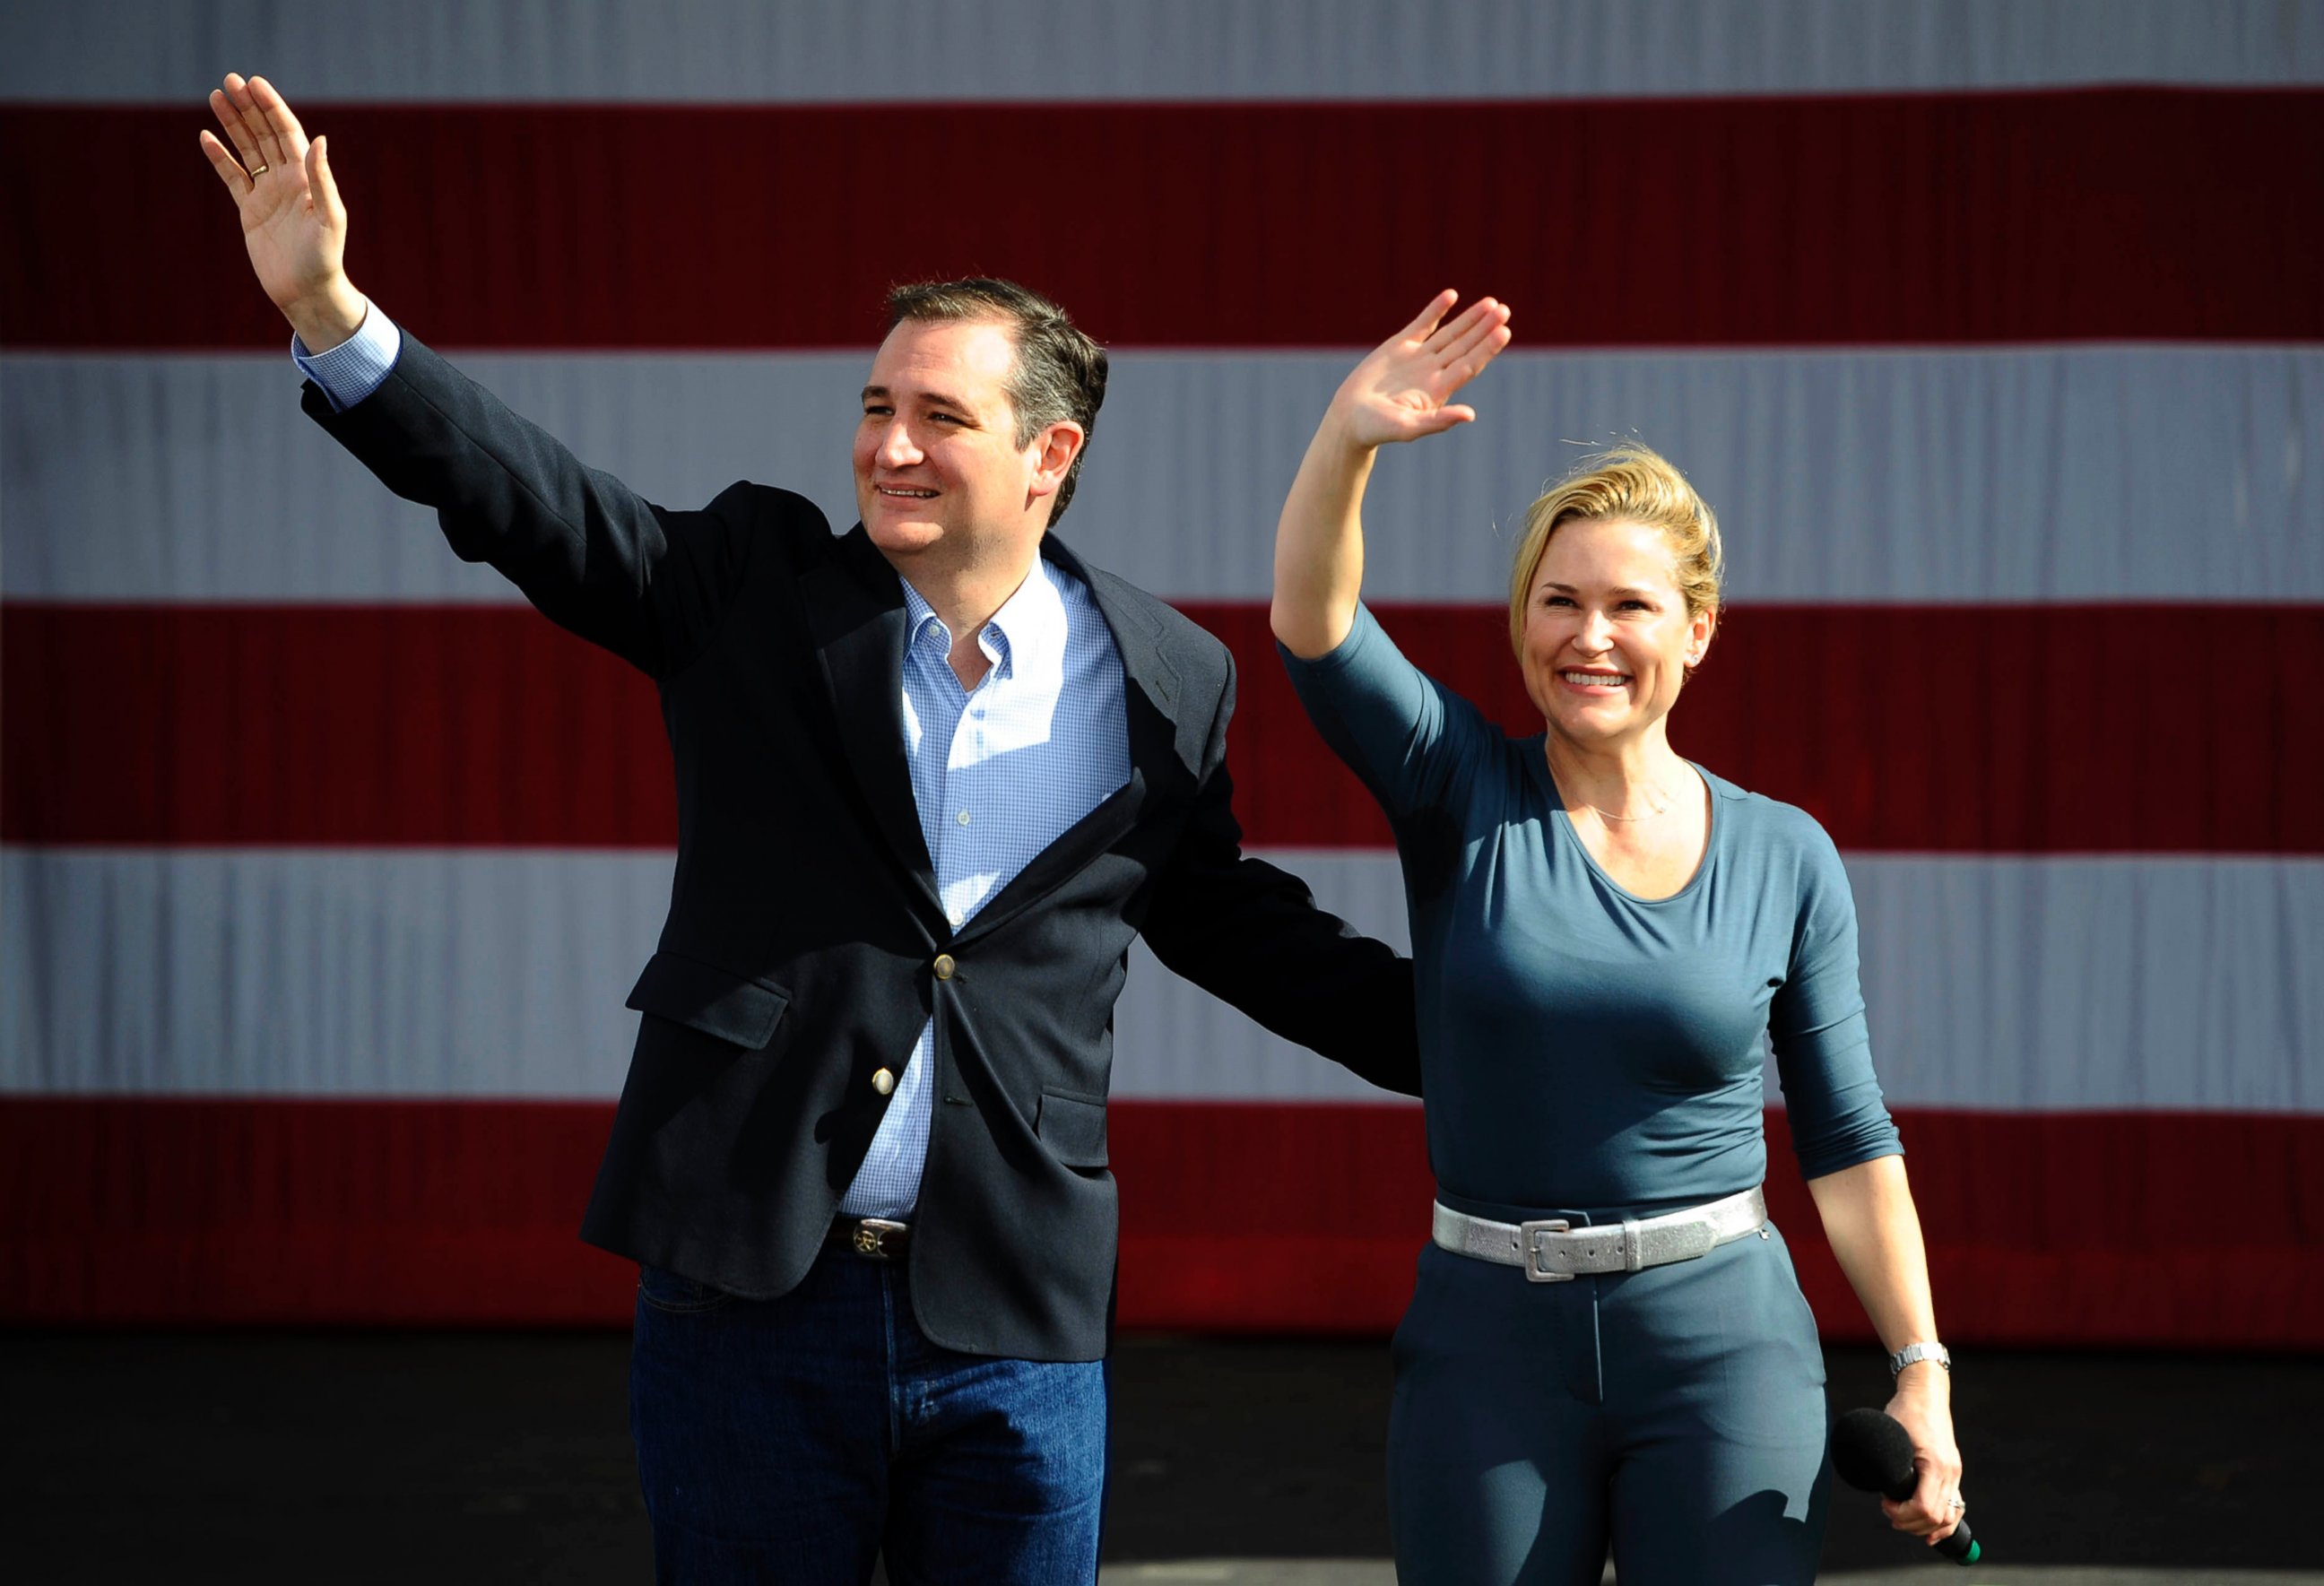 PHOTO: Ted Cruz and wife Heidi wave to supporters during his Keep The Promise rally in Concord, N.C., March 13, 2016.